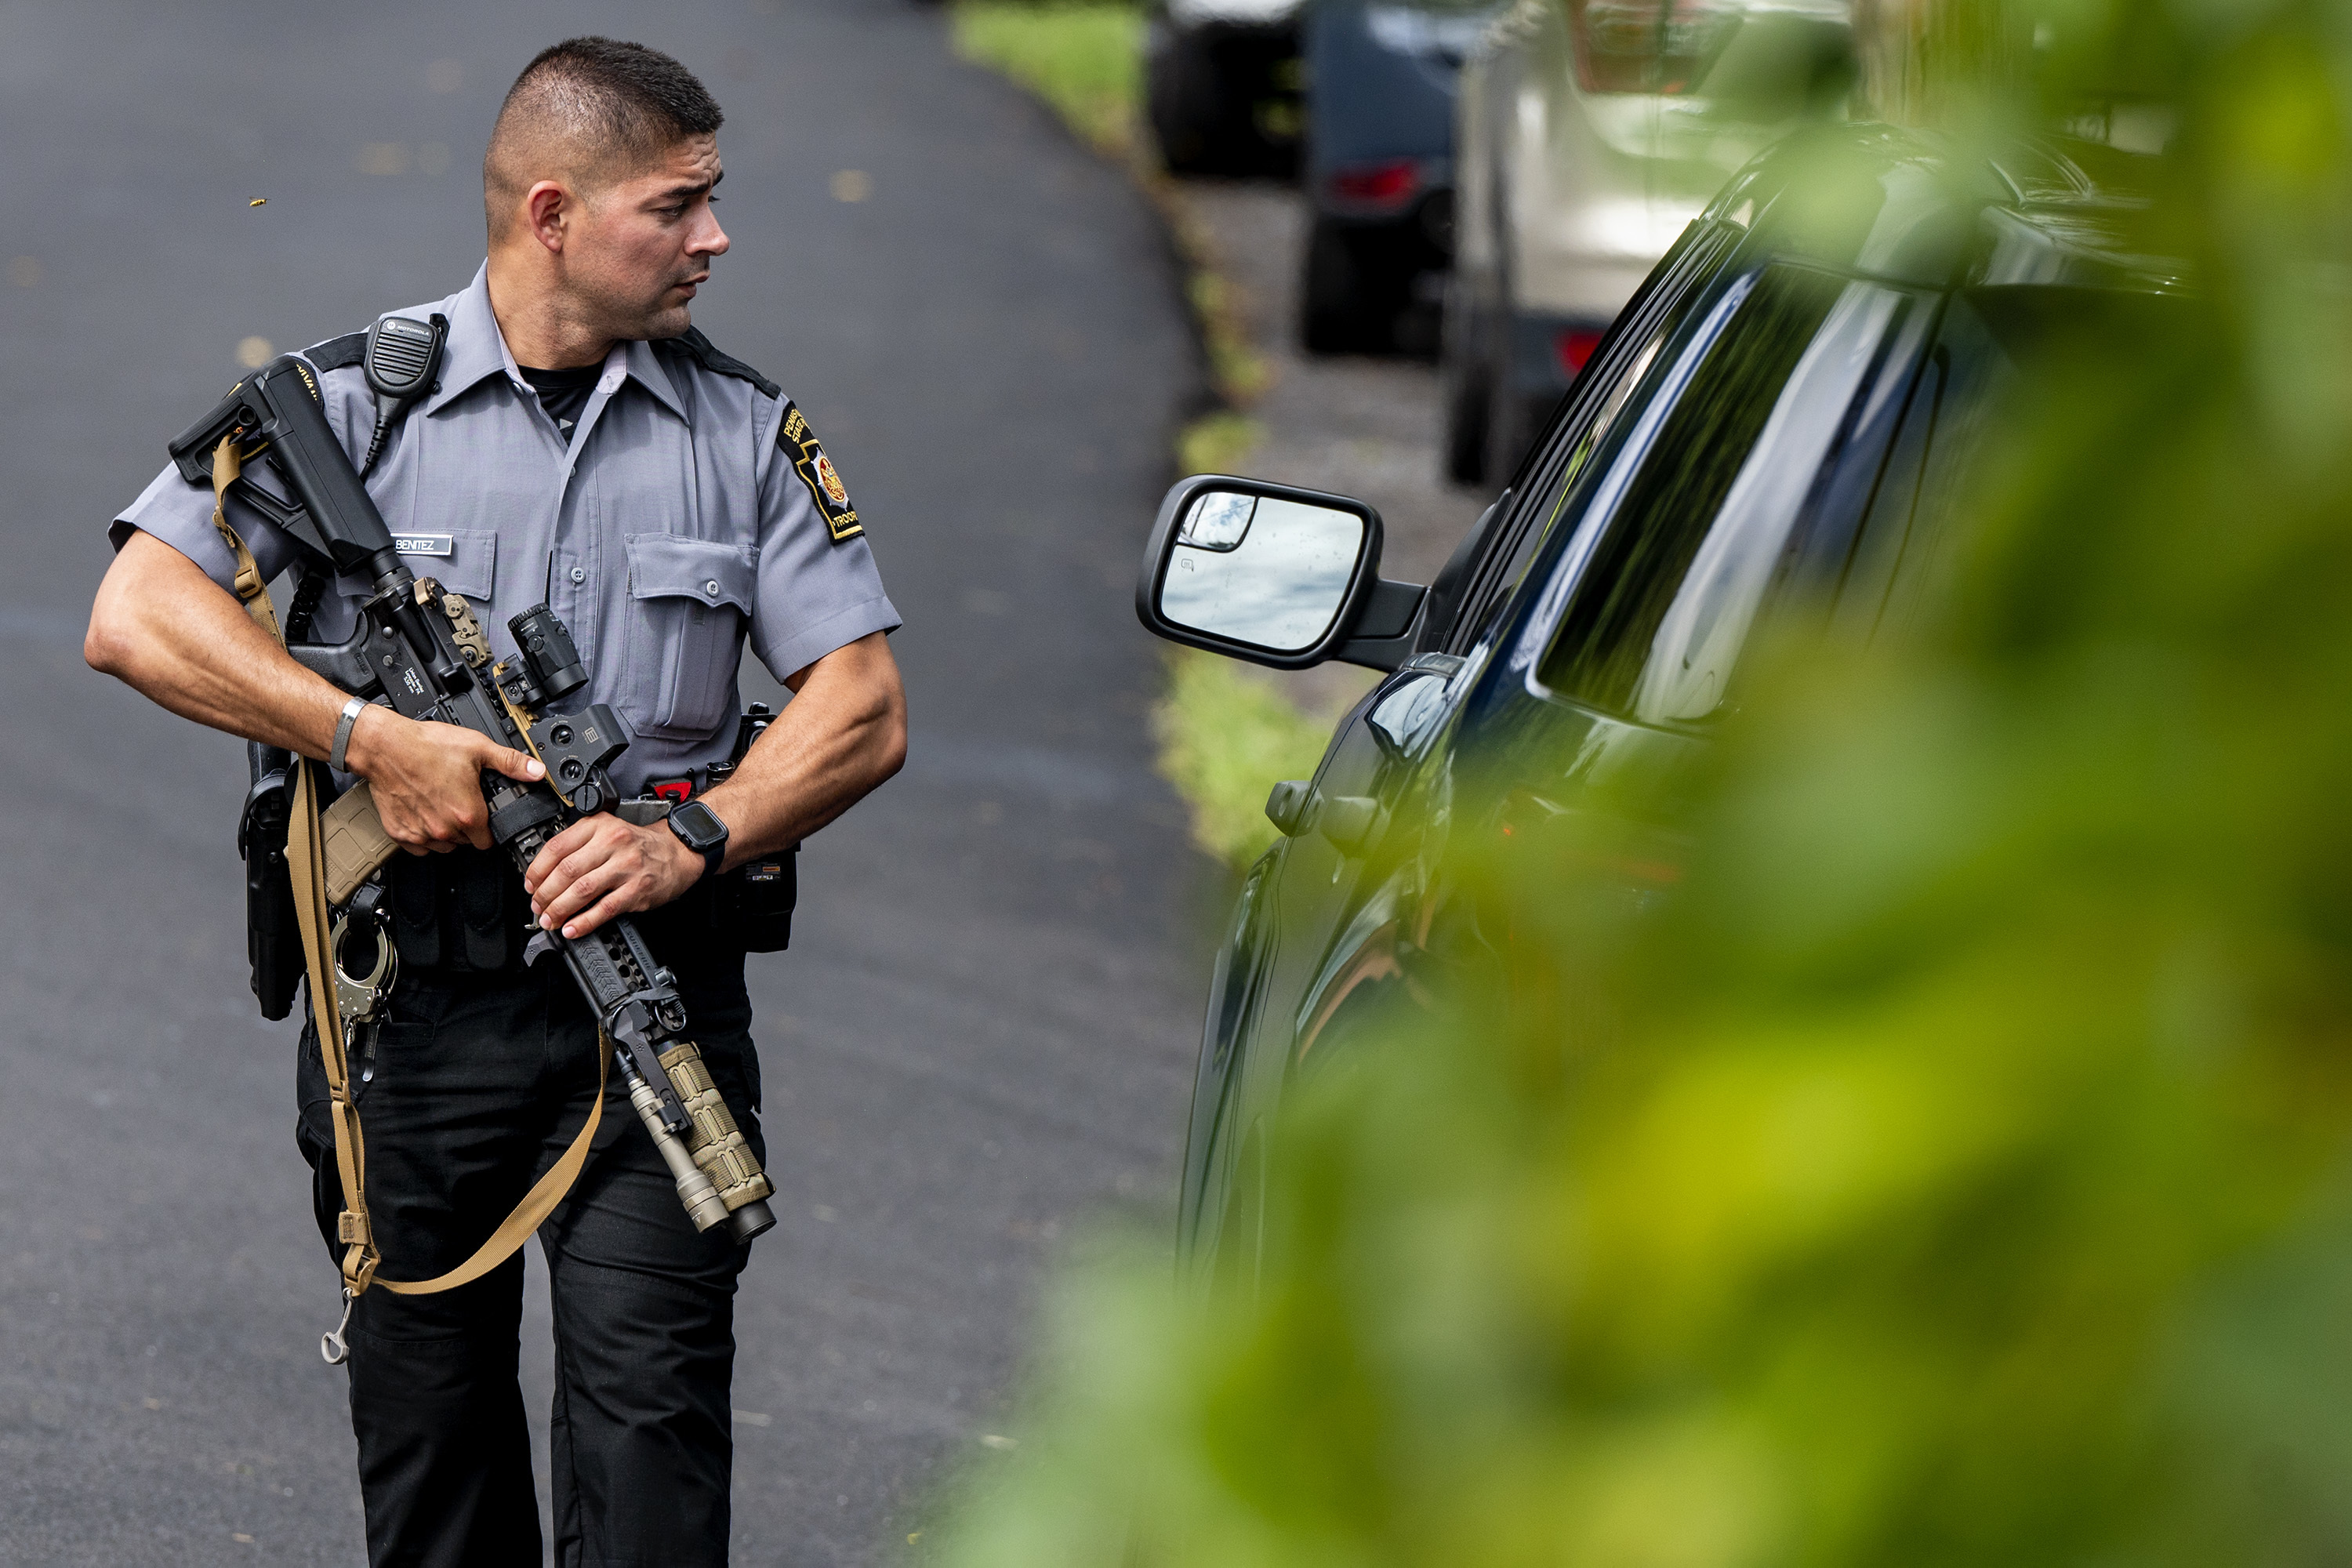 Police Danelo Cavalcante is armed, residents in South Coventry Township area should stay indoors